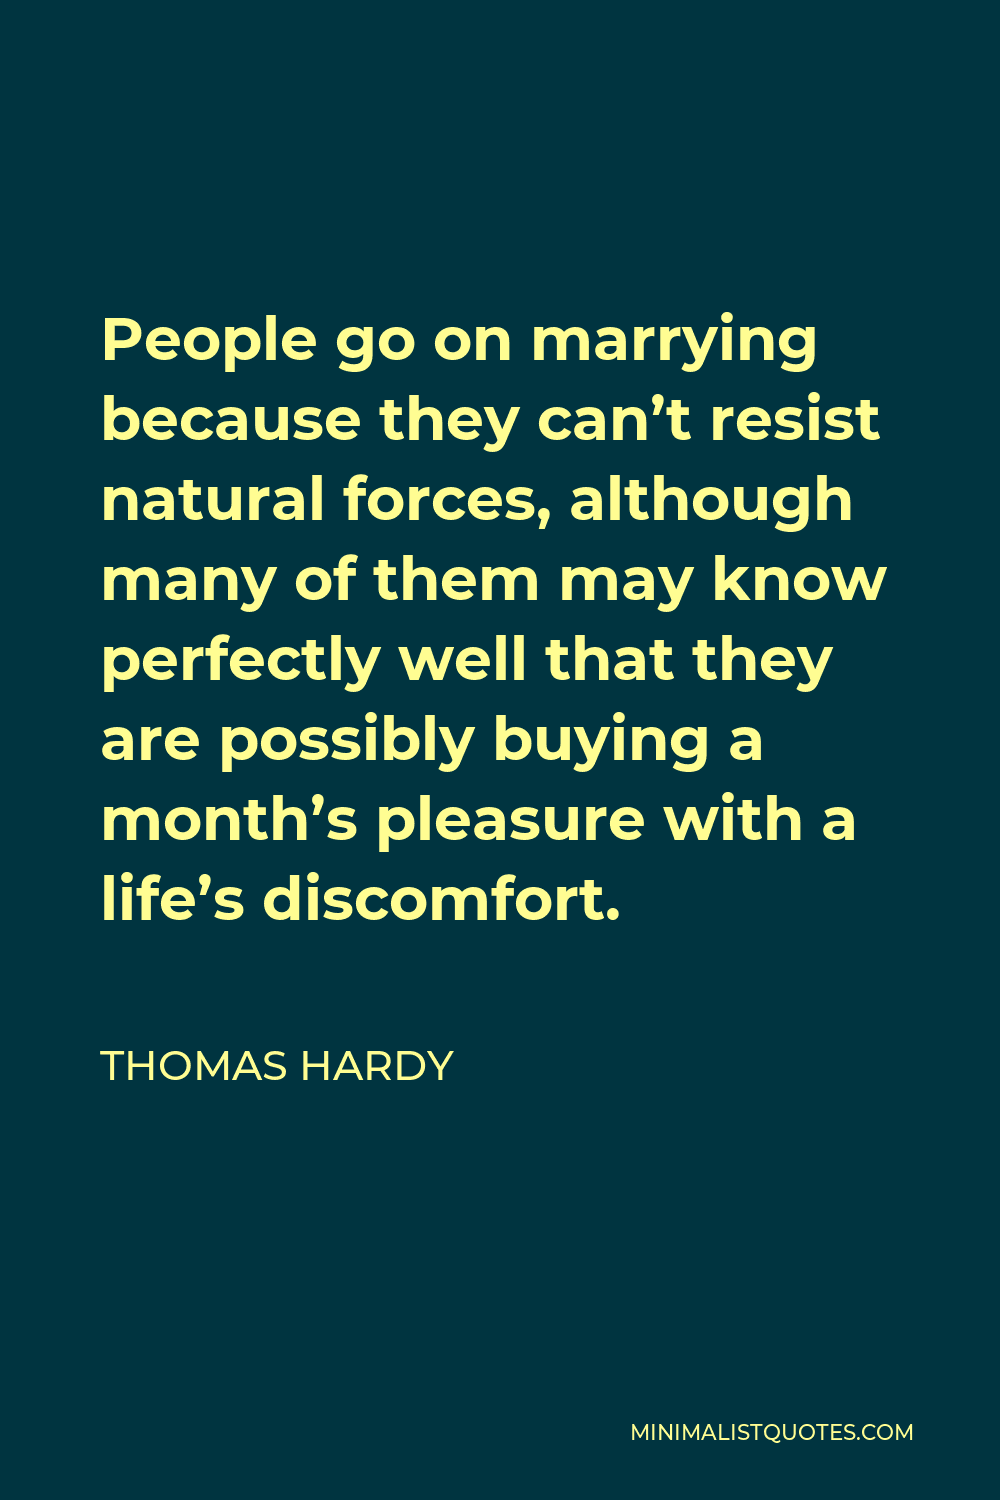 Thomas Hardy Quote - People go on marrying because they can’t resist natural forces, although many of them may know perfectly well that they are possibly buying a month’s pleasure with a life’s discomfort.